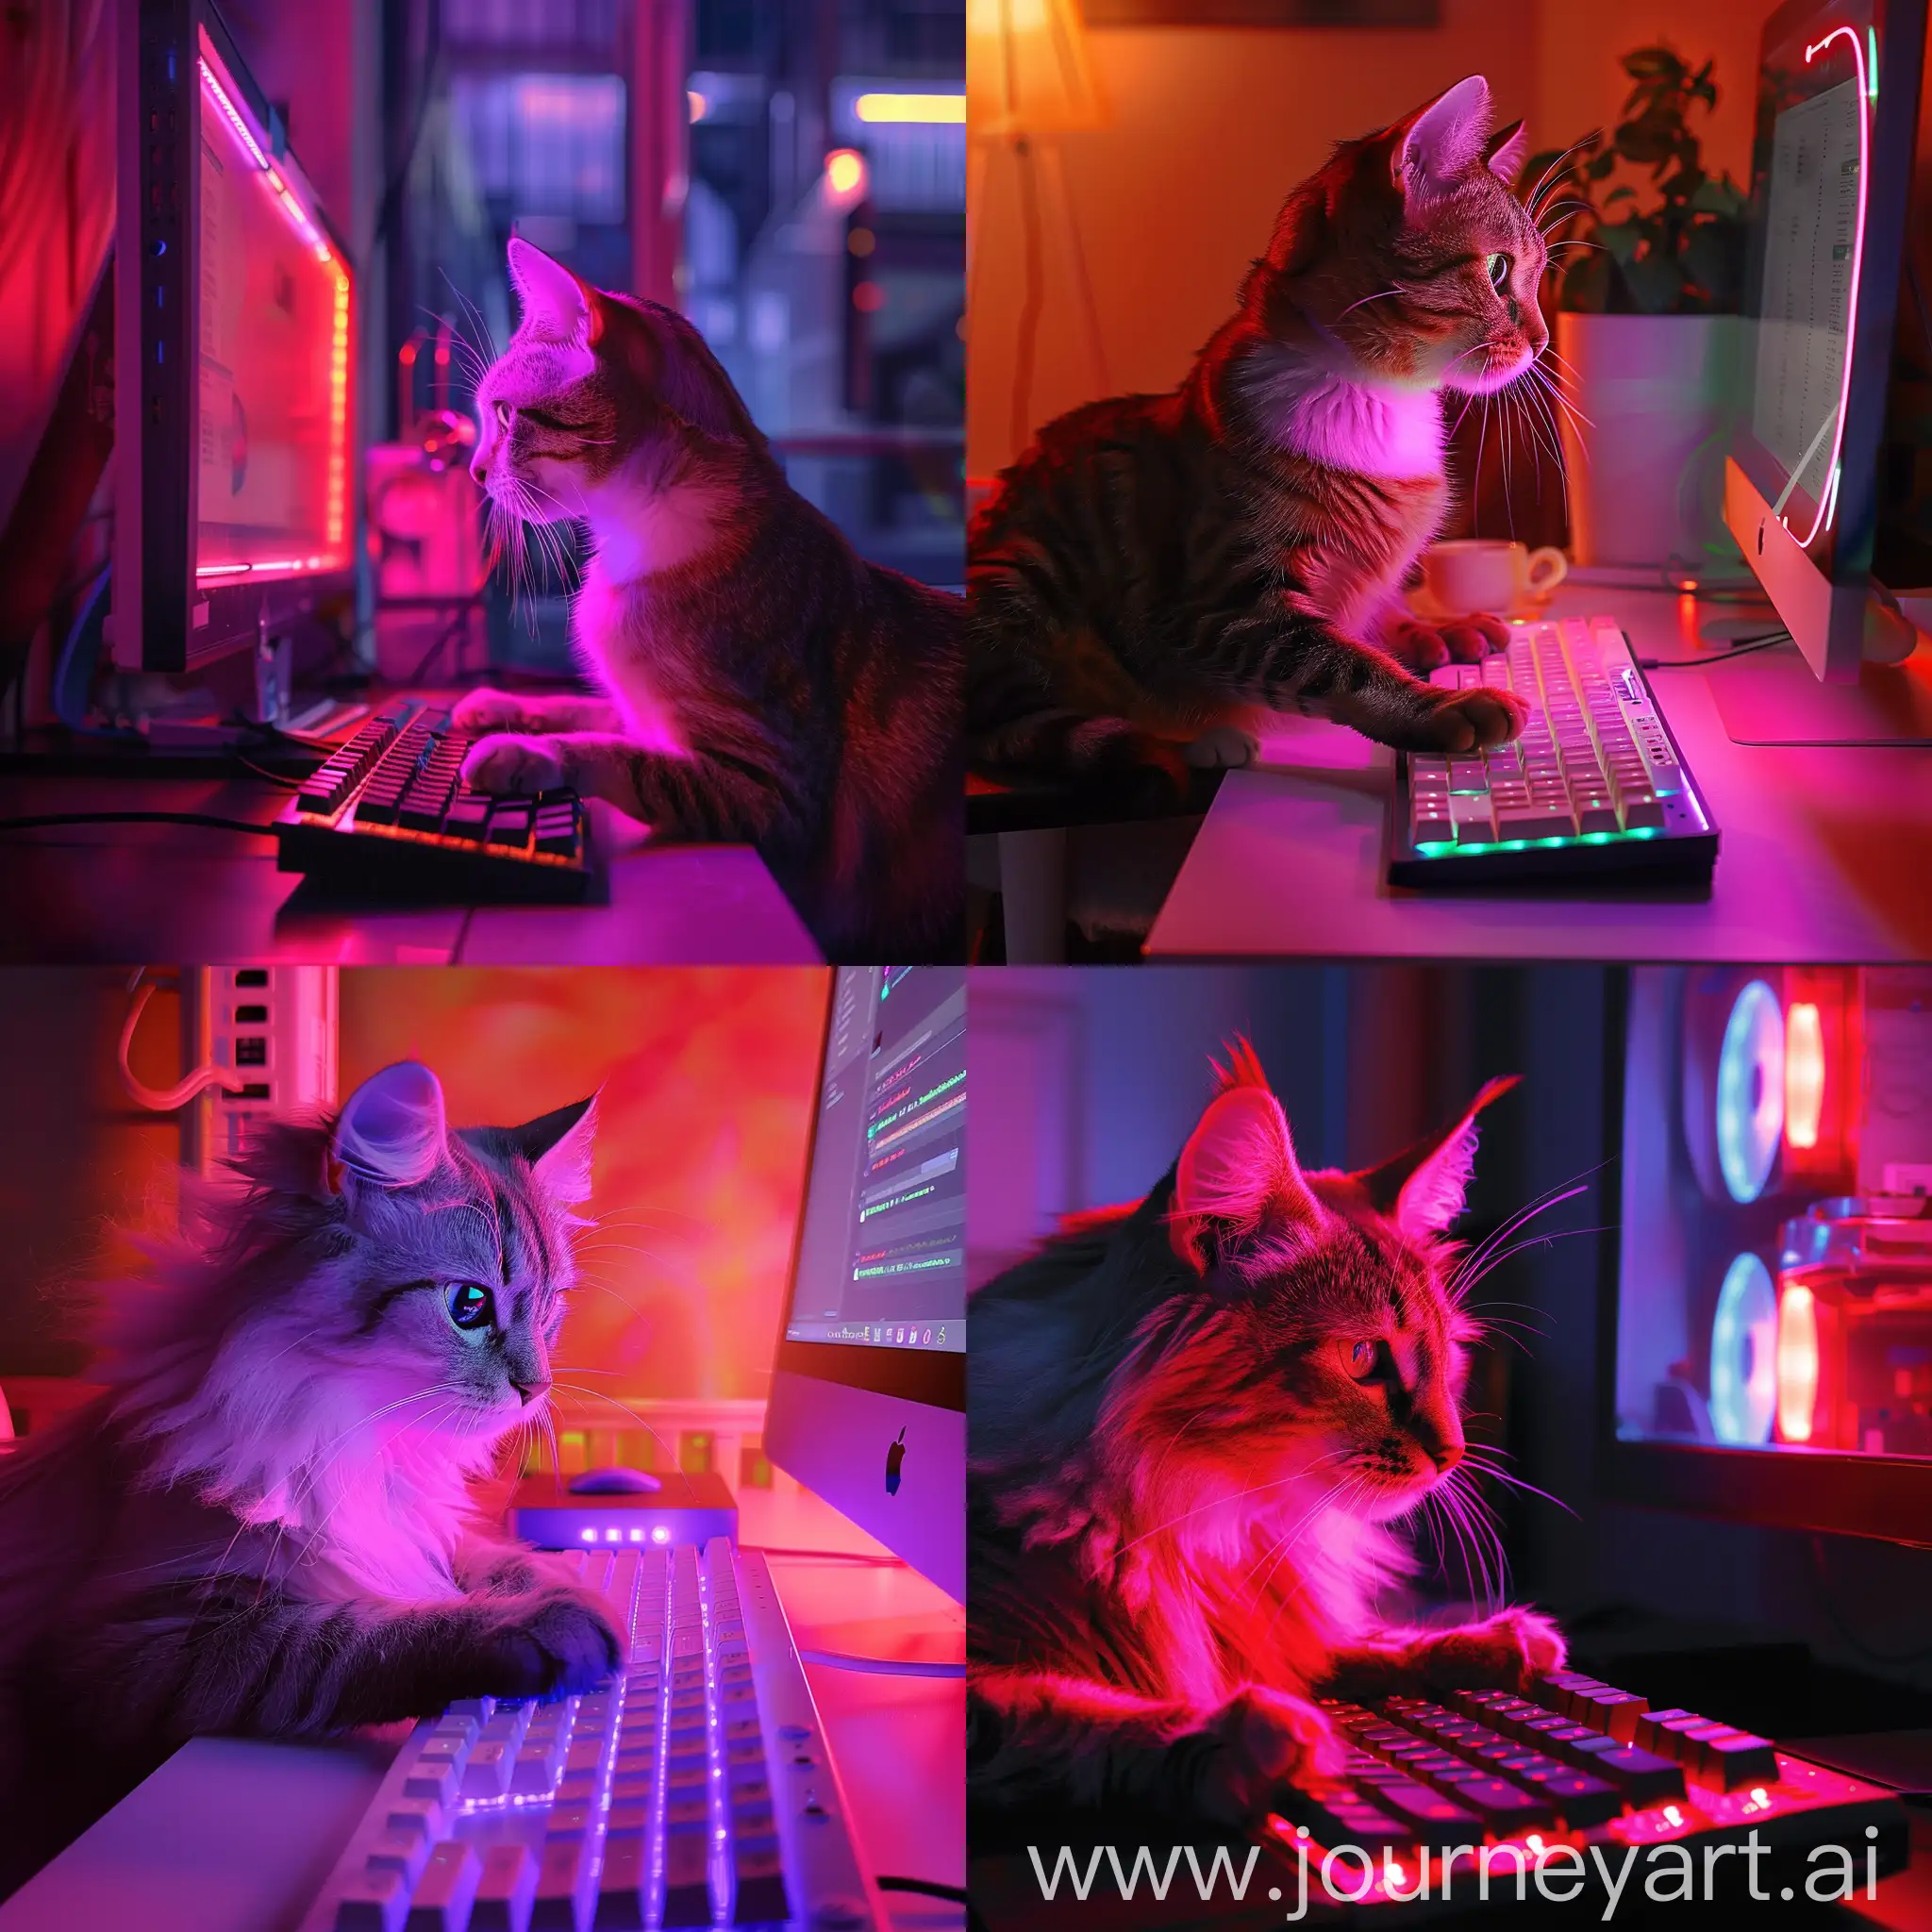 the cat is sitting at the computer and working, neon lighting